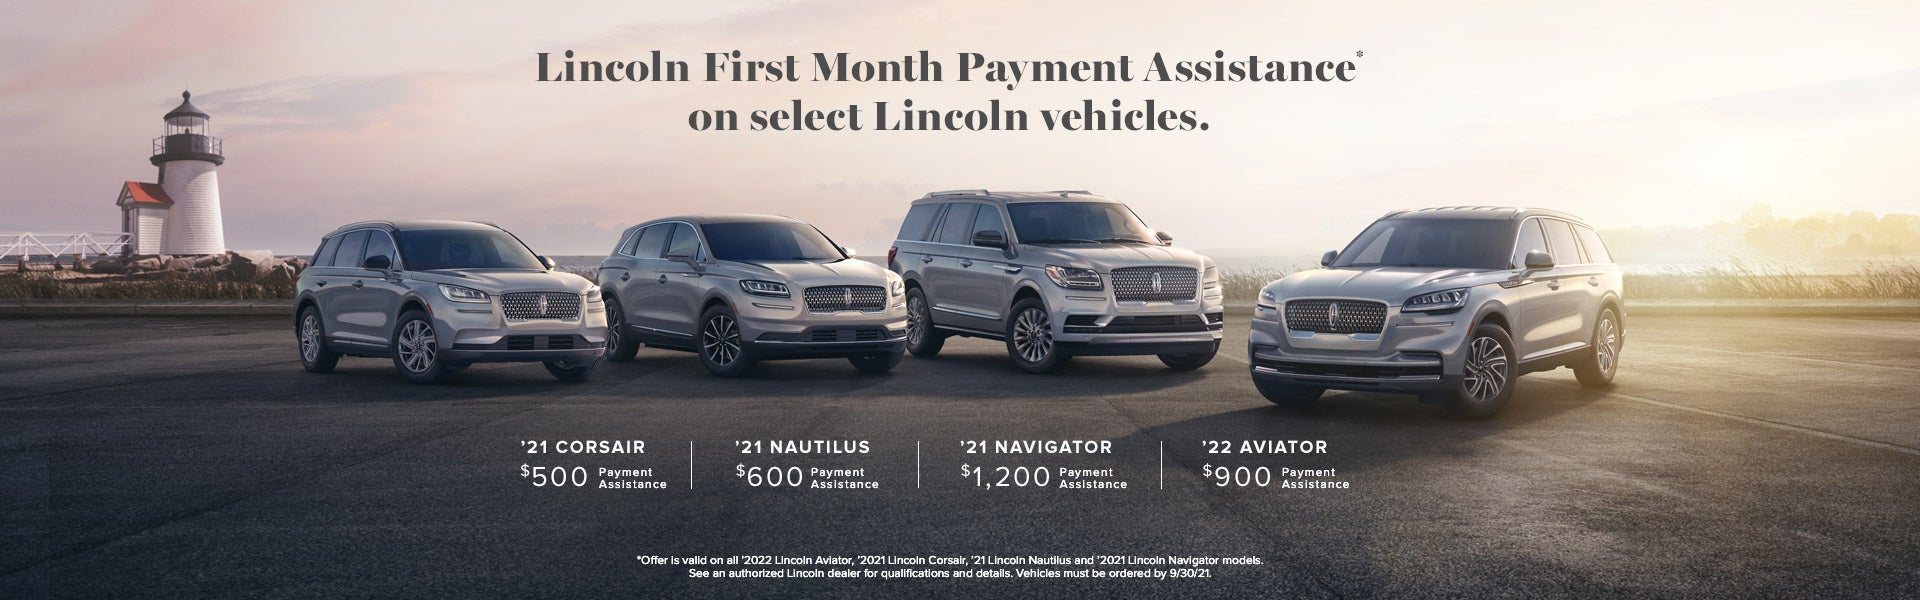 First Month Payment Assistance